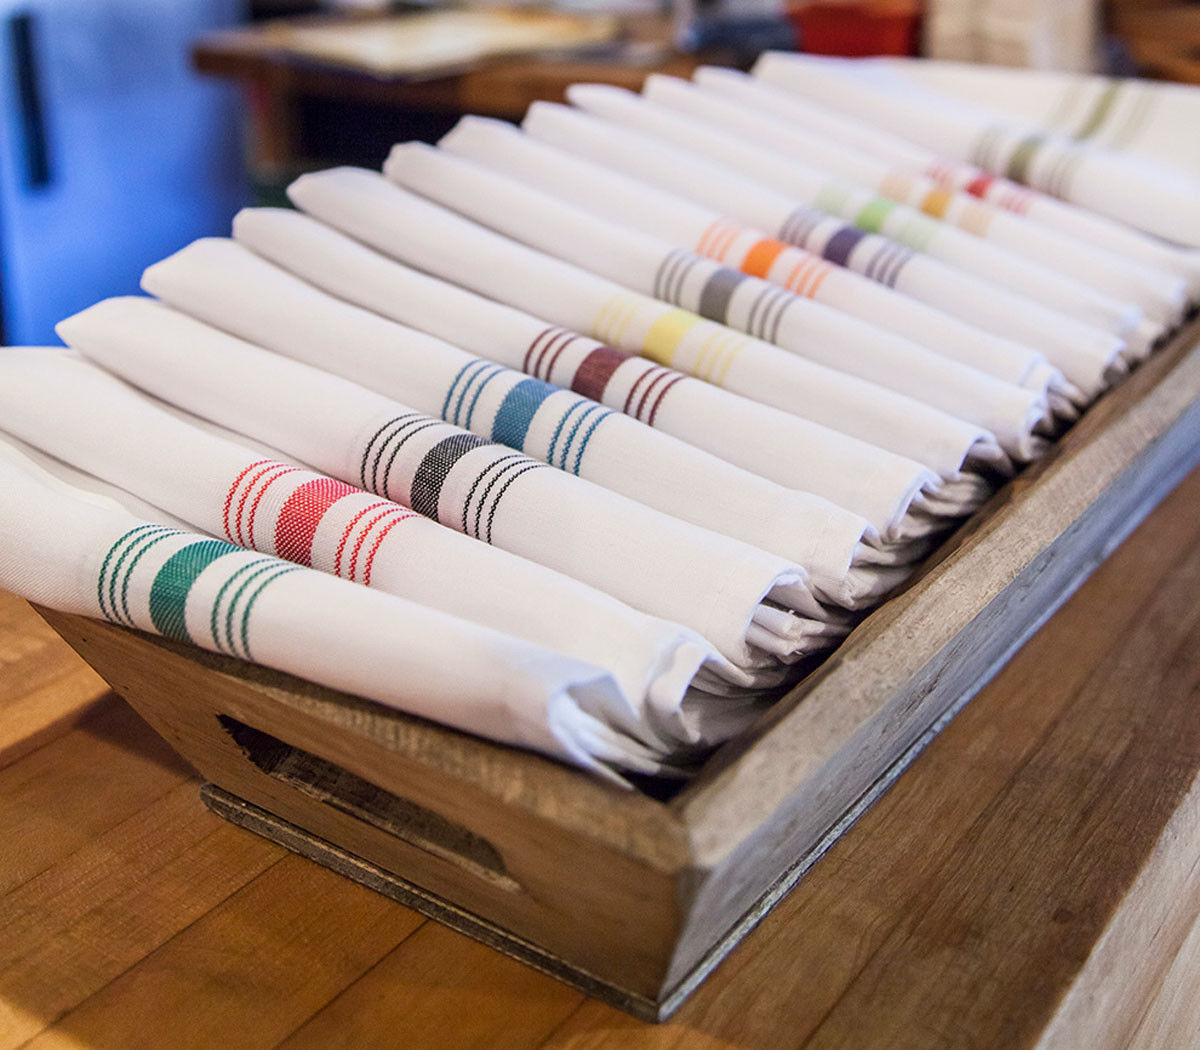 Can you specify the style and size of the Milliken Signature Stripe bistro napkins?